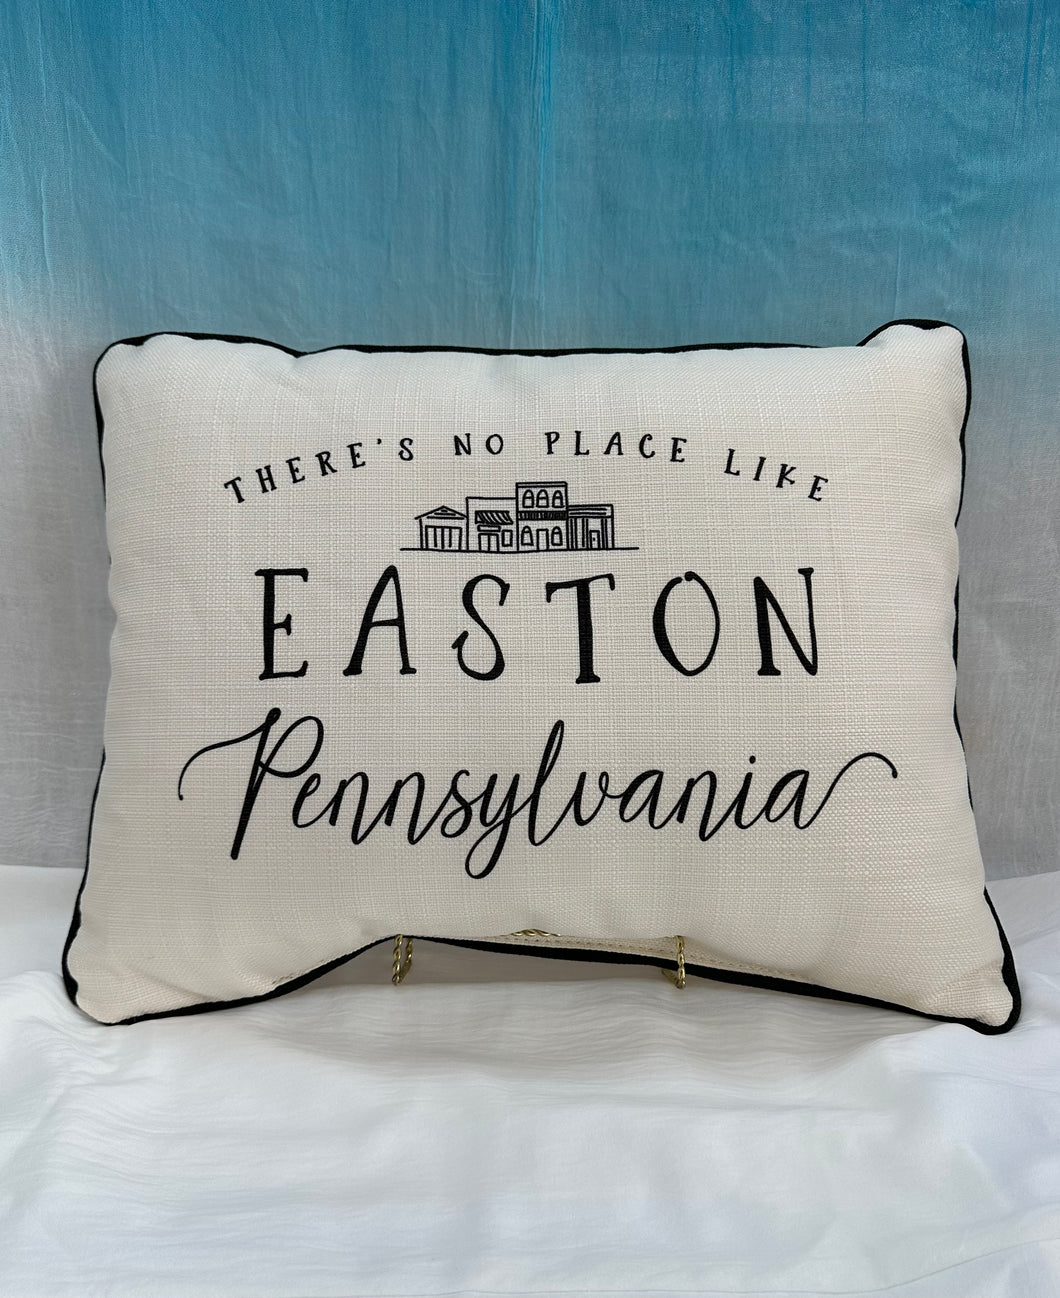 There’s No Place Like Easton Pennsylvania Pillow